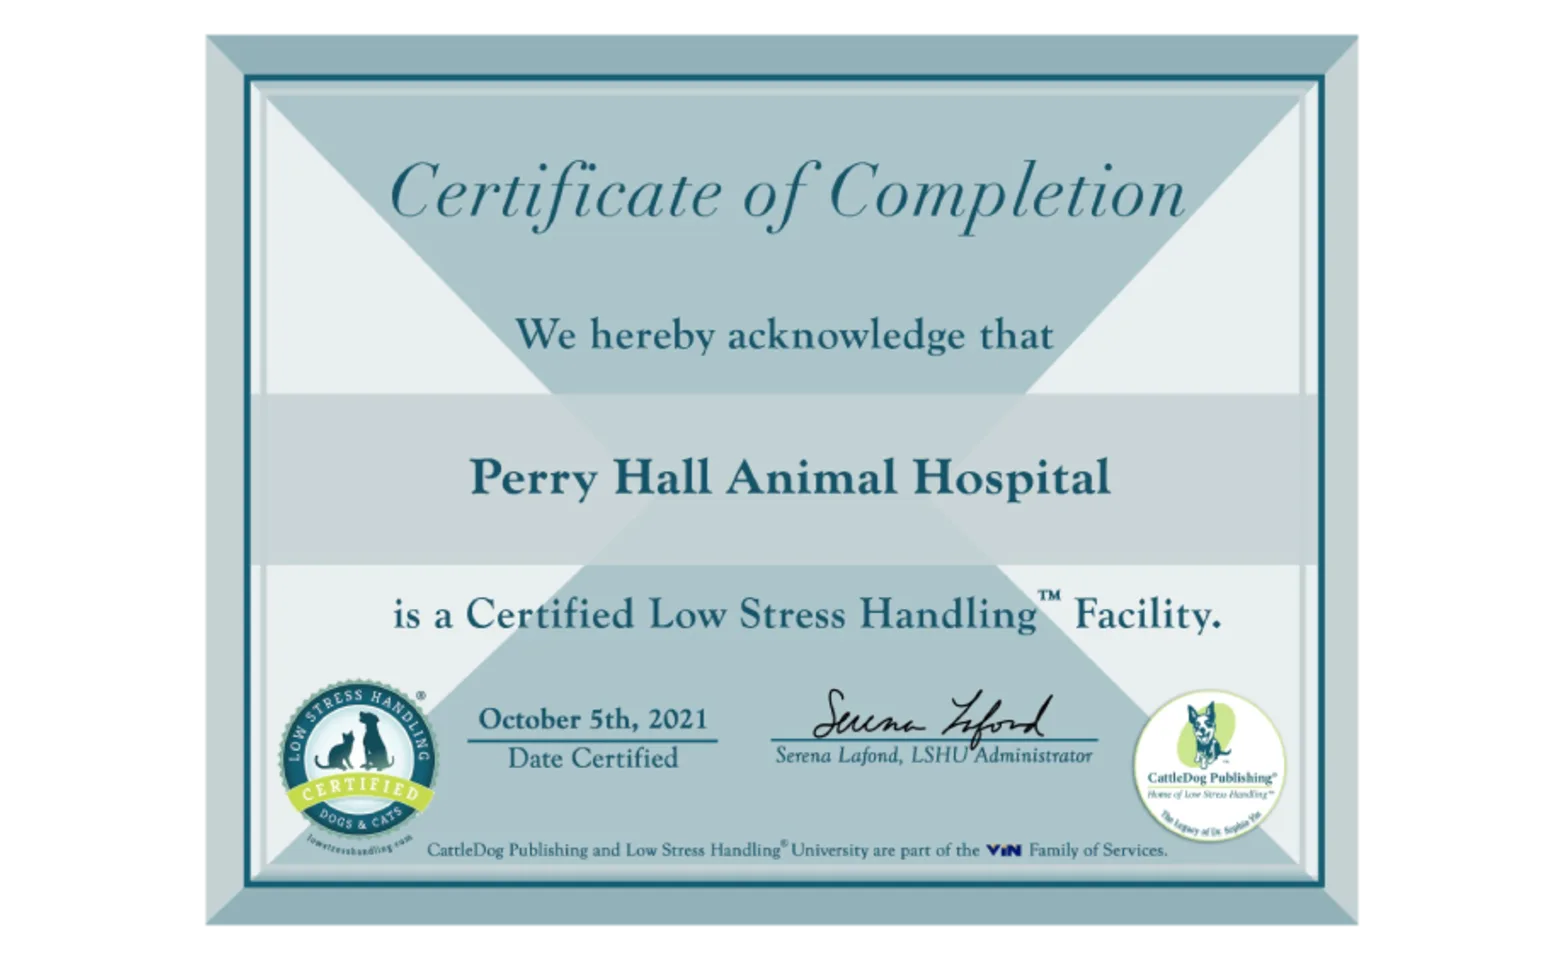 Perry Hall's certificate for Low-Stress Handling Facility